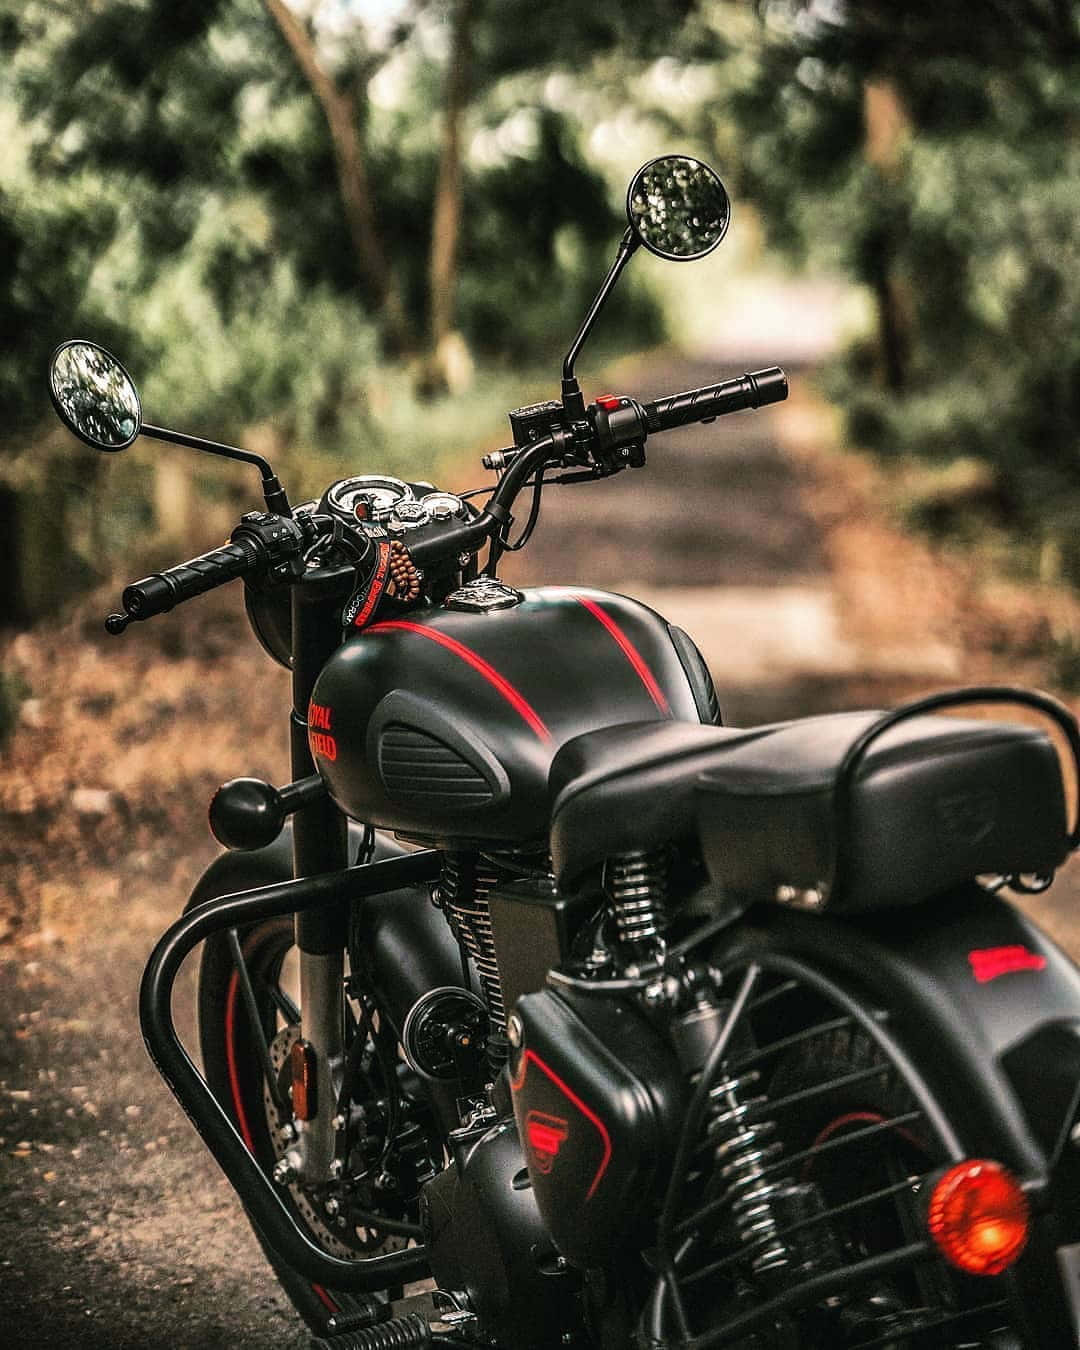 "Adventure Awaits with the Iconic Royal Enfield Bullet"